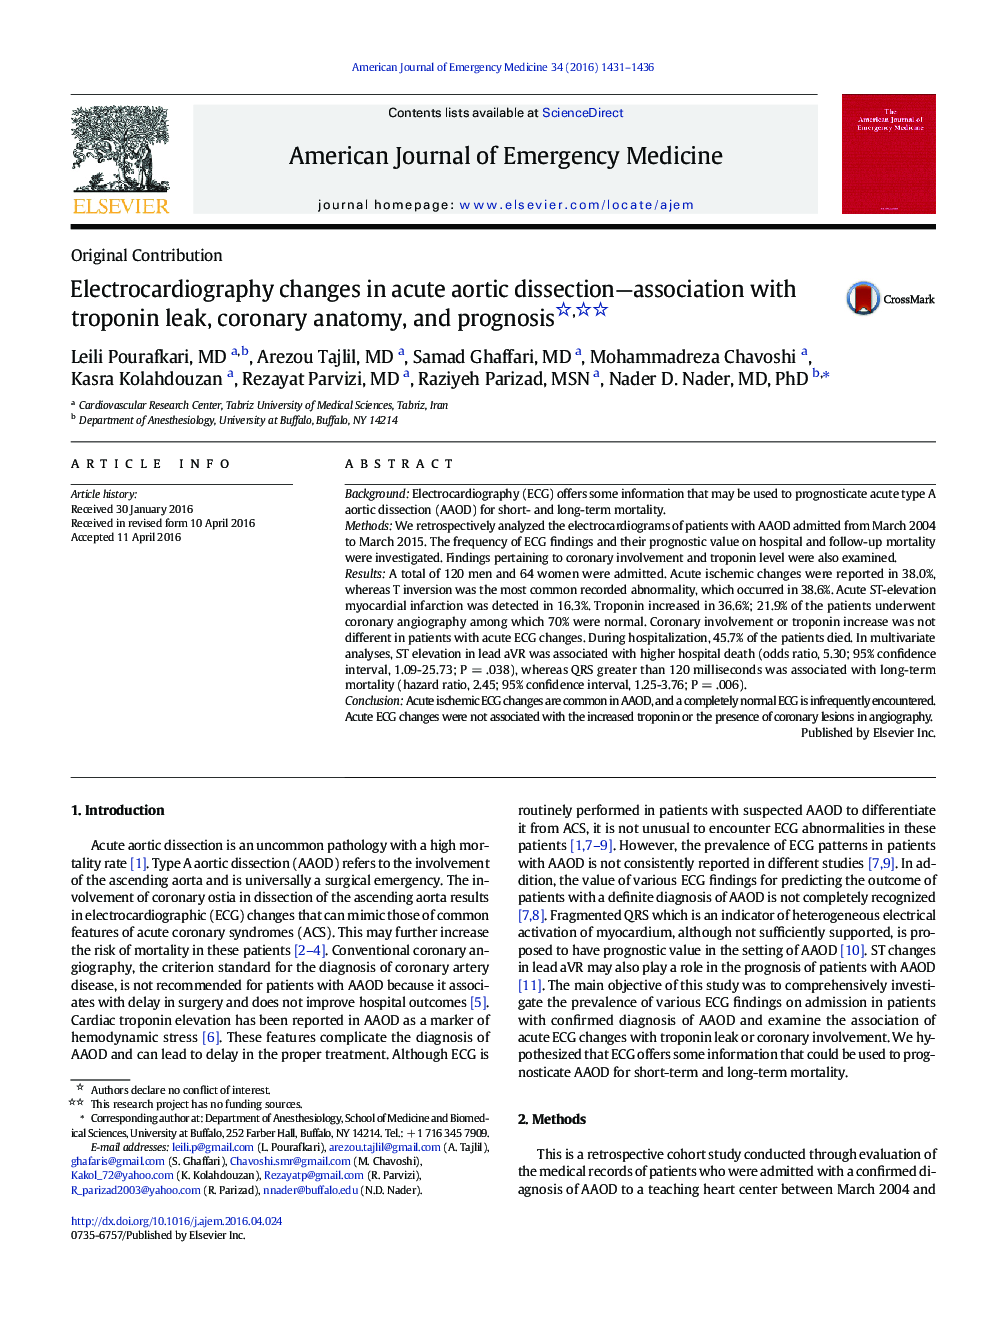 Original ContributionElectrocardiography changes in acute aortic dissection-association with troponin leak, coronary anatomy, and prognosis